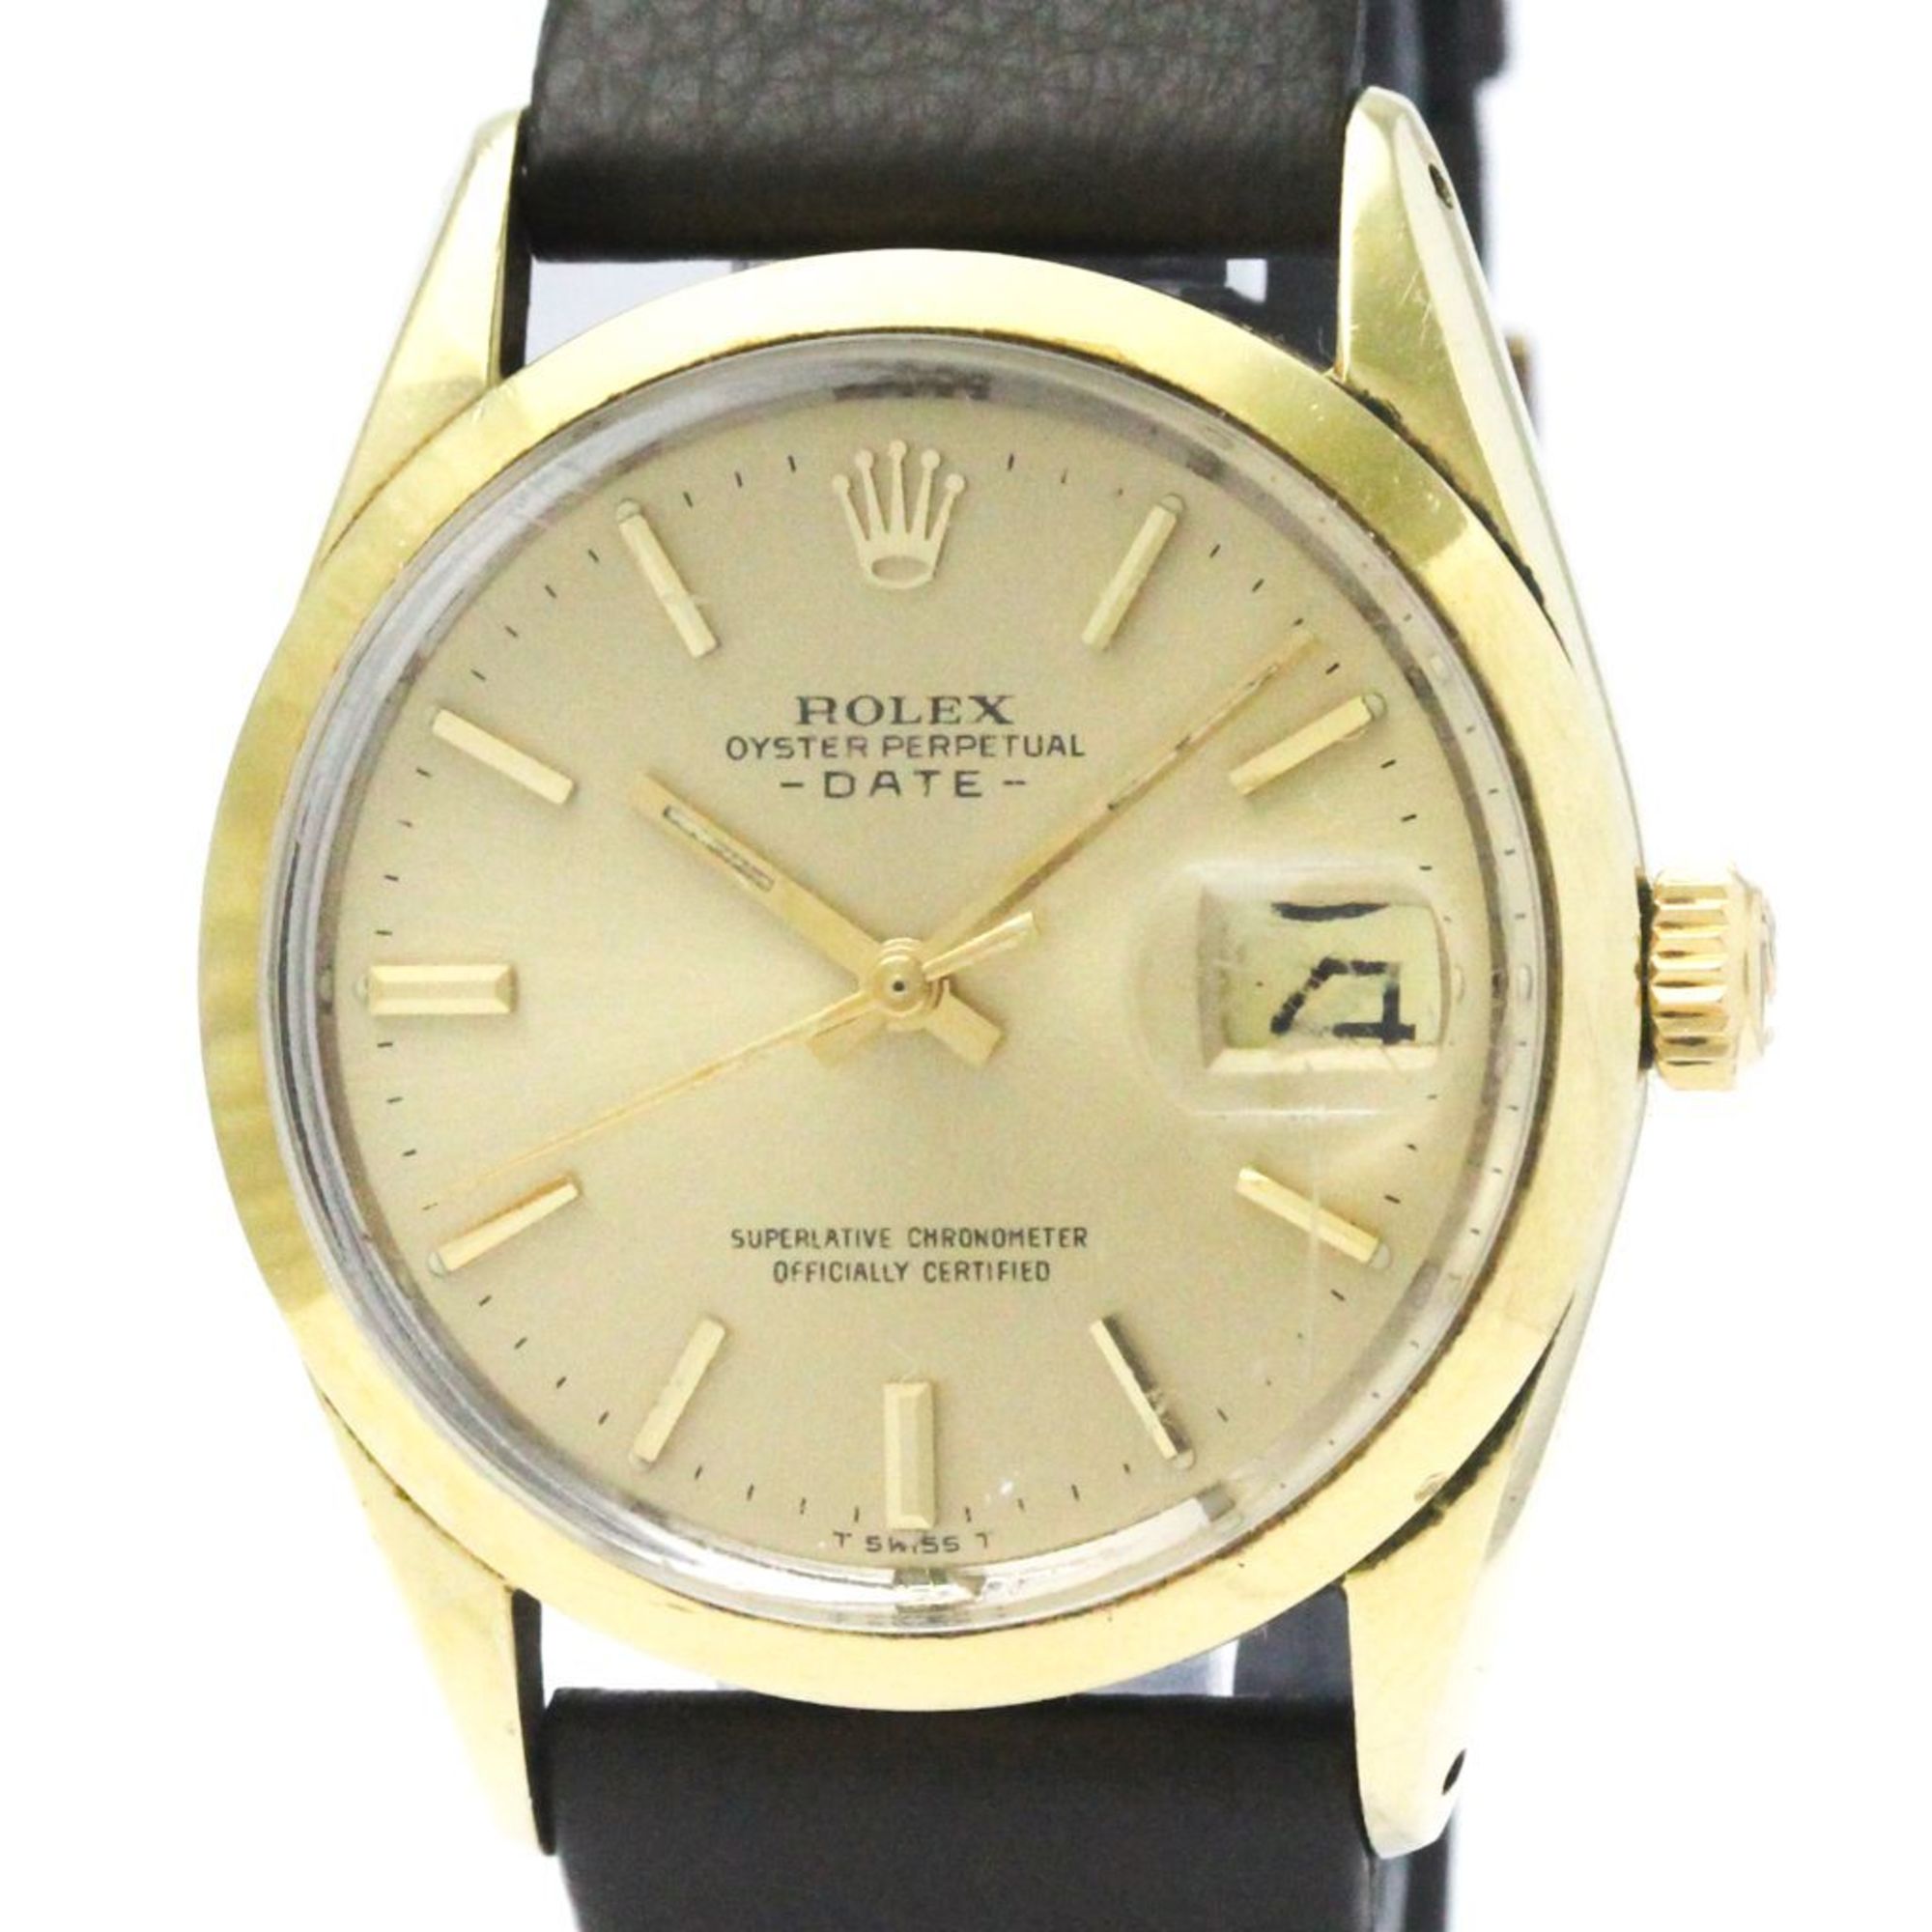 Vintage ROLEX Oyster Perpetual Date 1550 Gold Plated Automatic Watch BF568946